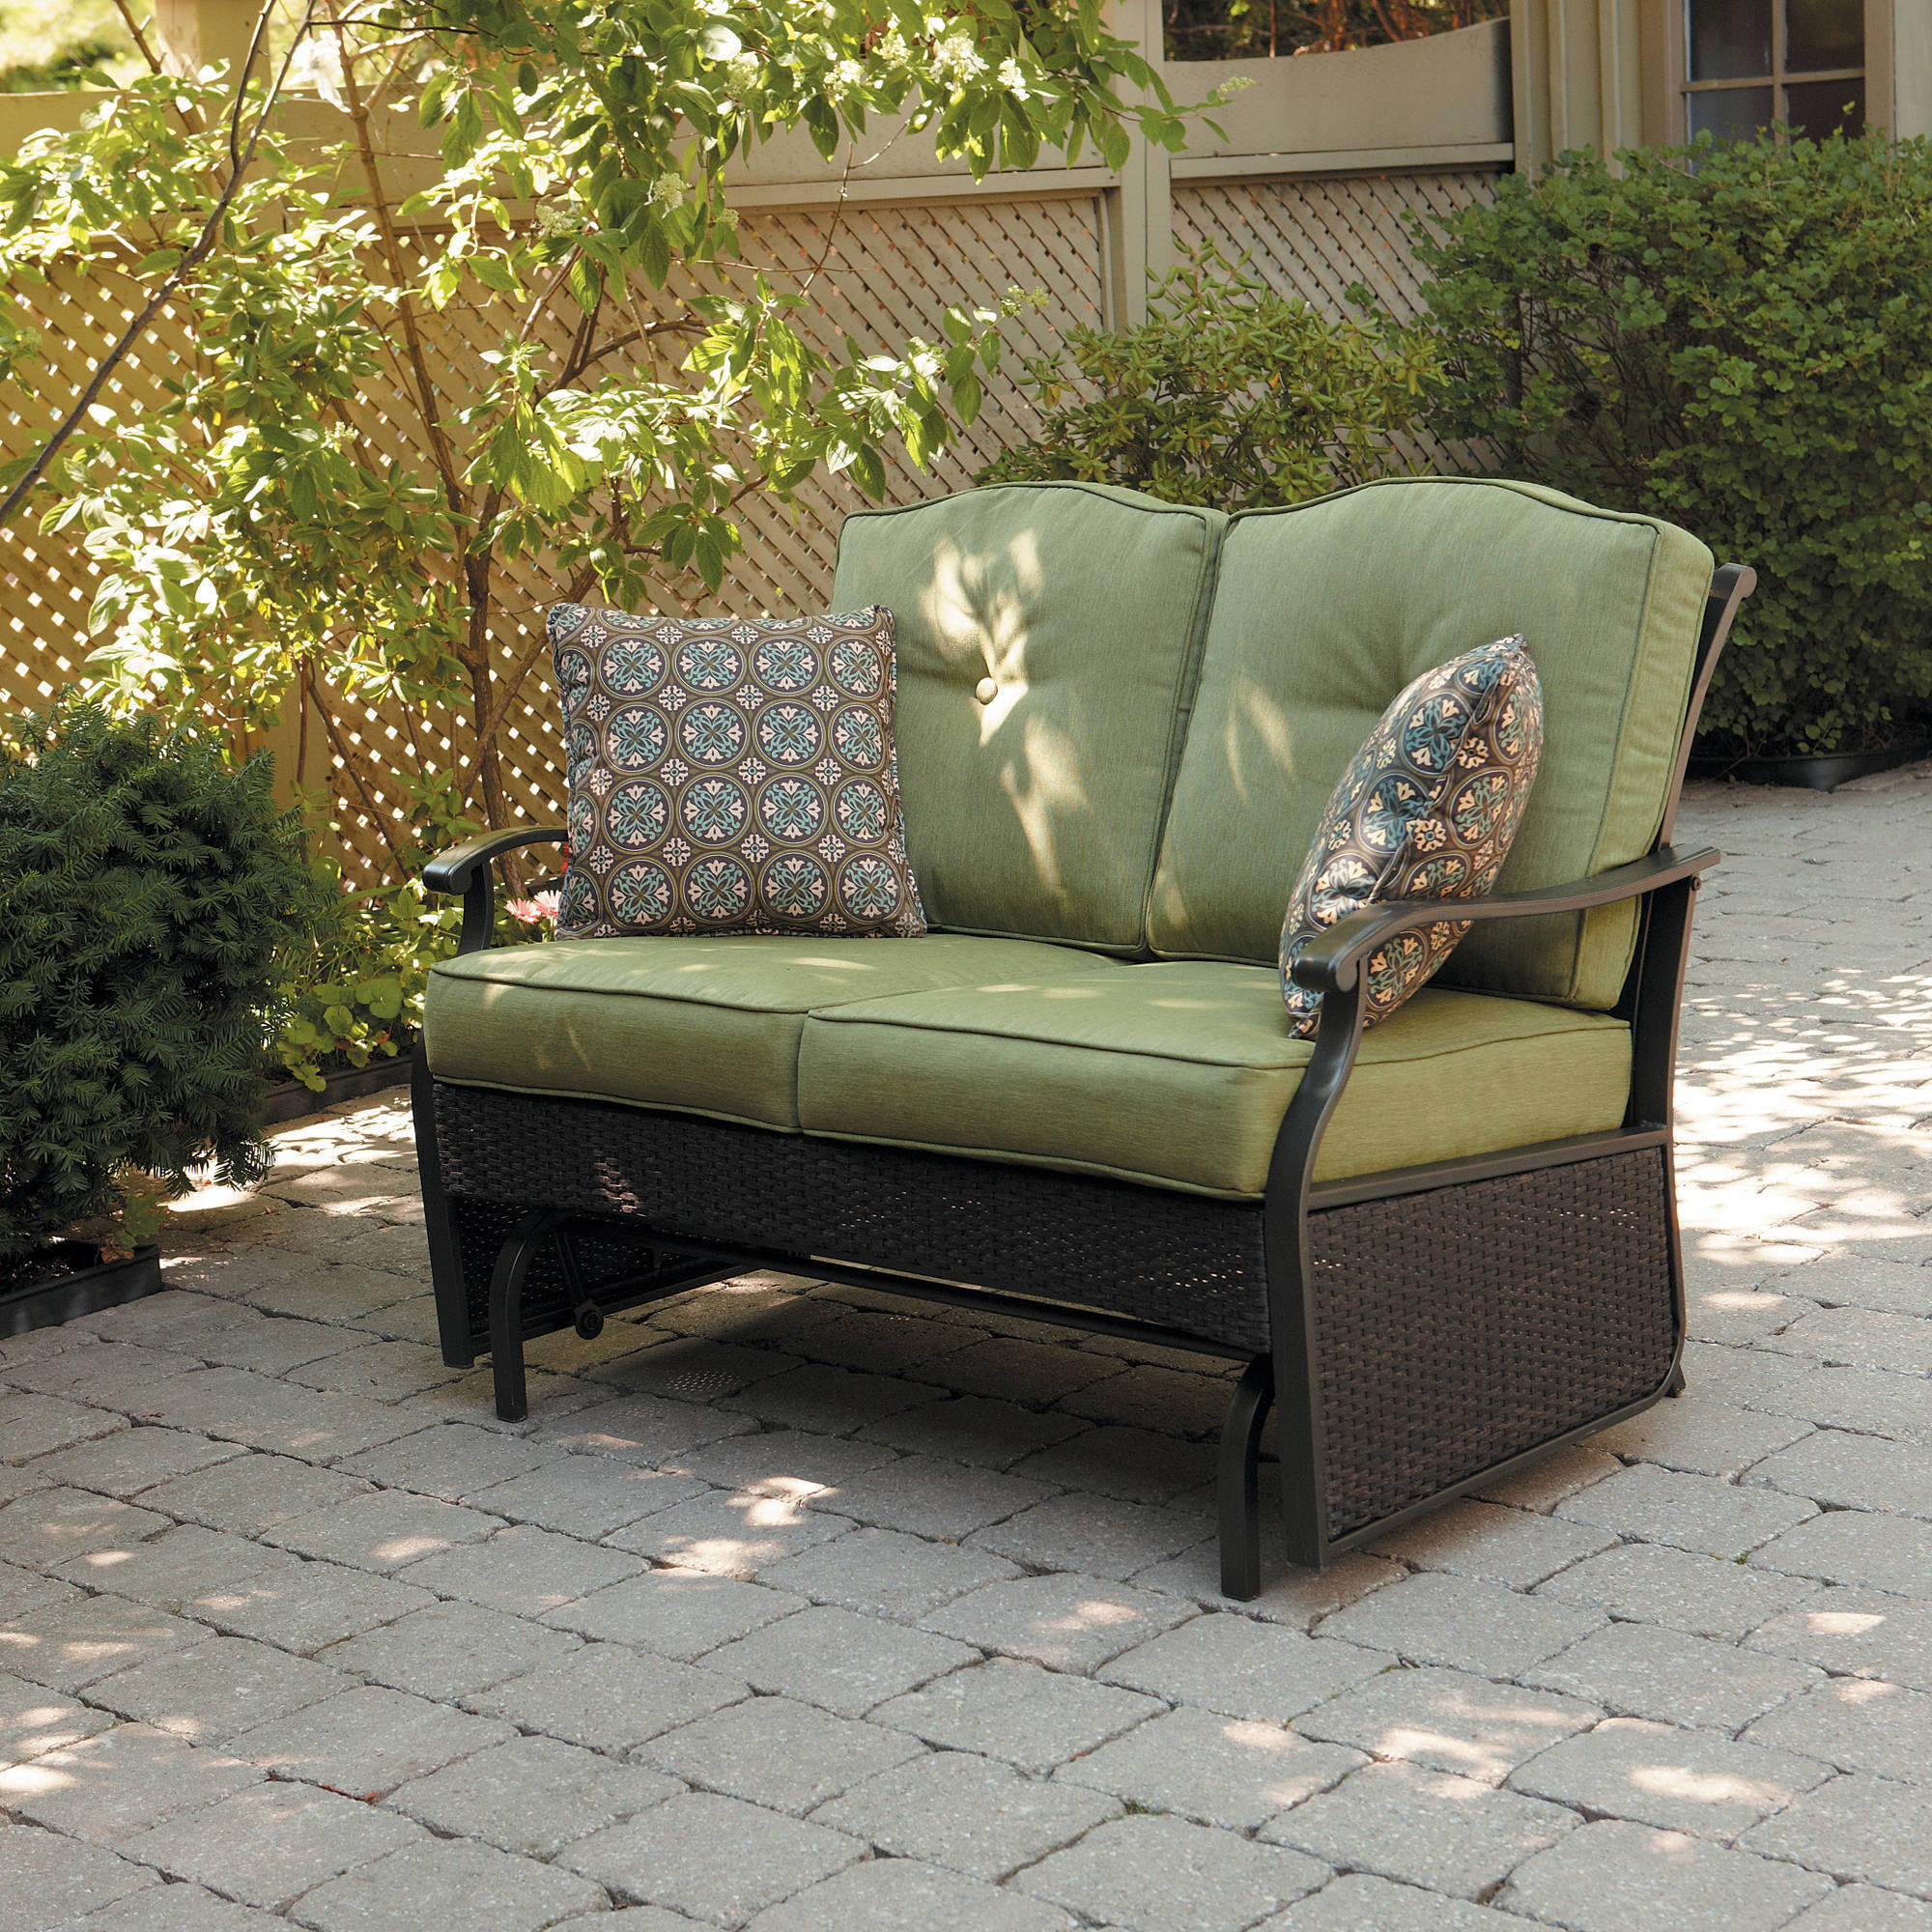 Better Homes and Gardens Providence Outdoor Glider Bench, Green, Seats 2  Walmart.com